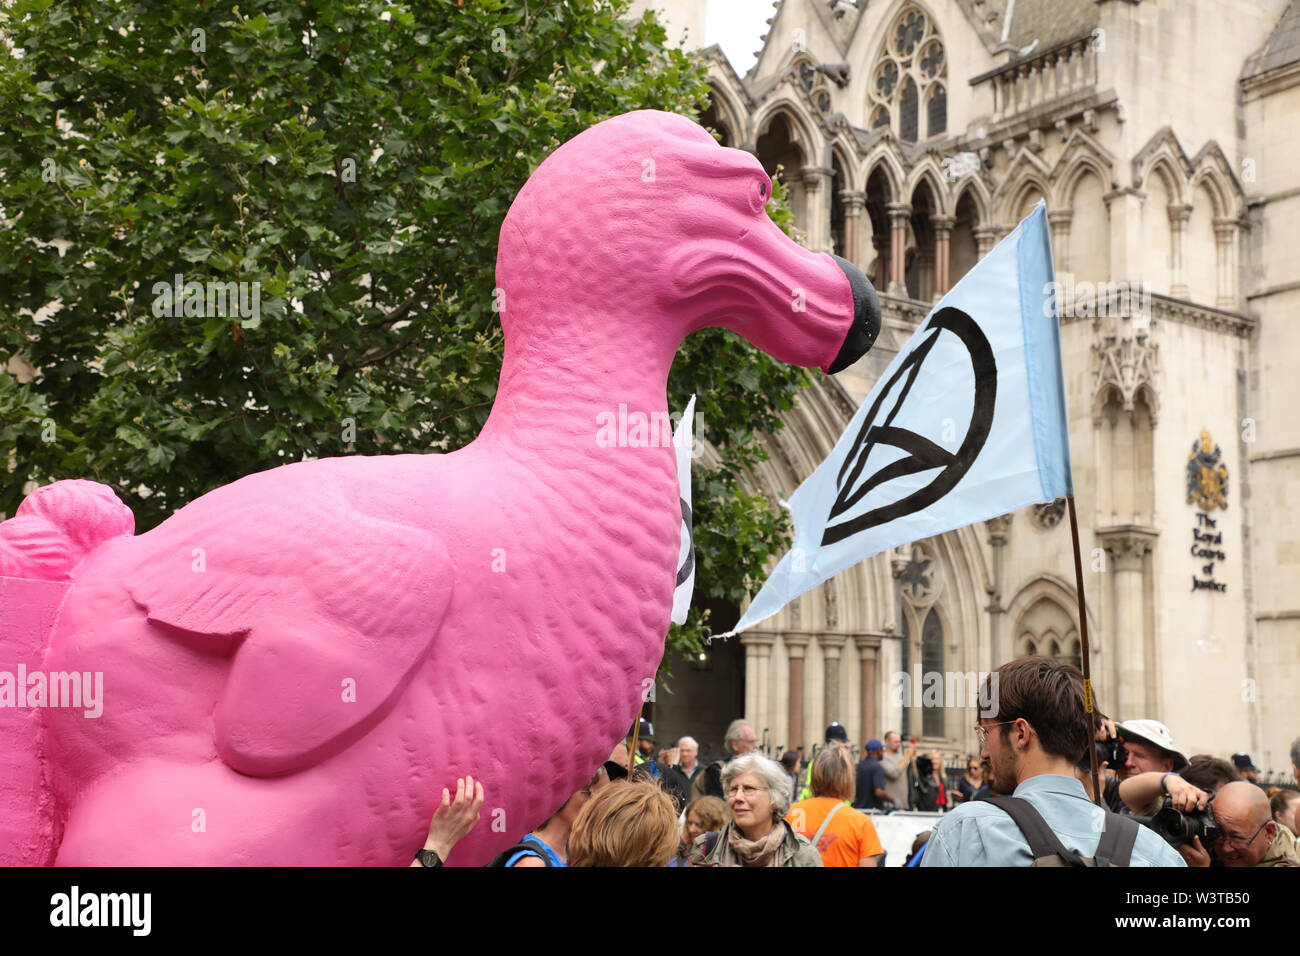 London, UK. 15th July 2019. The climate action group Extinction Rebellion holding protests on several places in the UK such as here in front of the Royal Courts of Law on the Strand, London, closing part of the street demanding a law on Ecocide. Credit: Joe Kuis / Alamy News Stock Photo